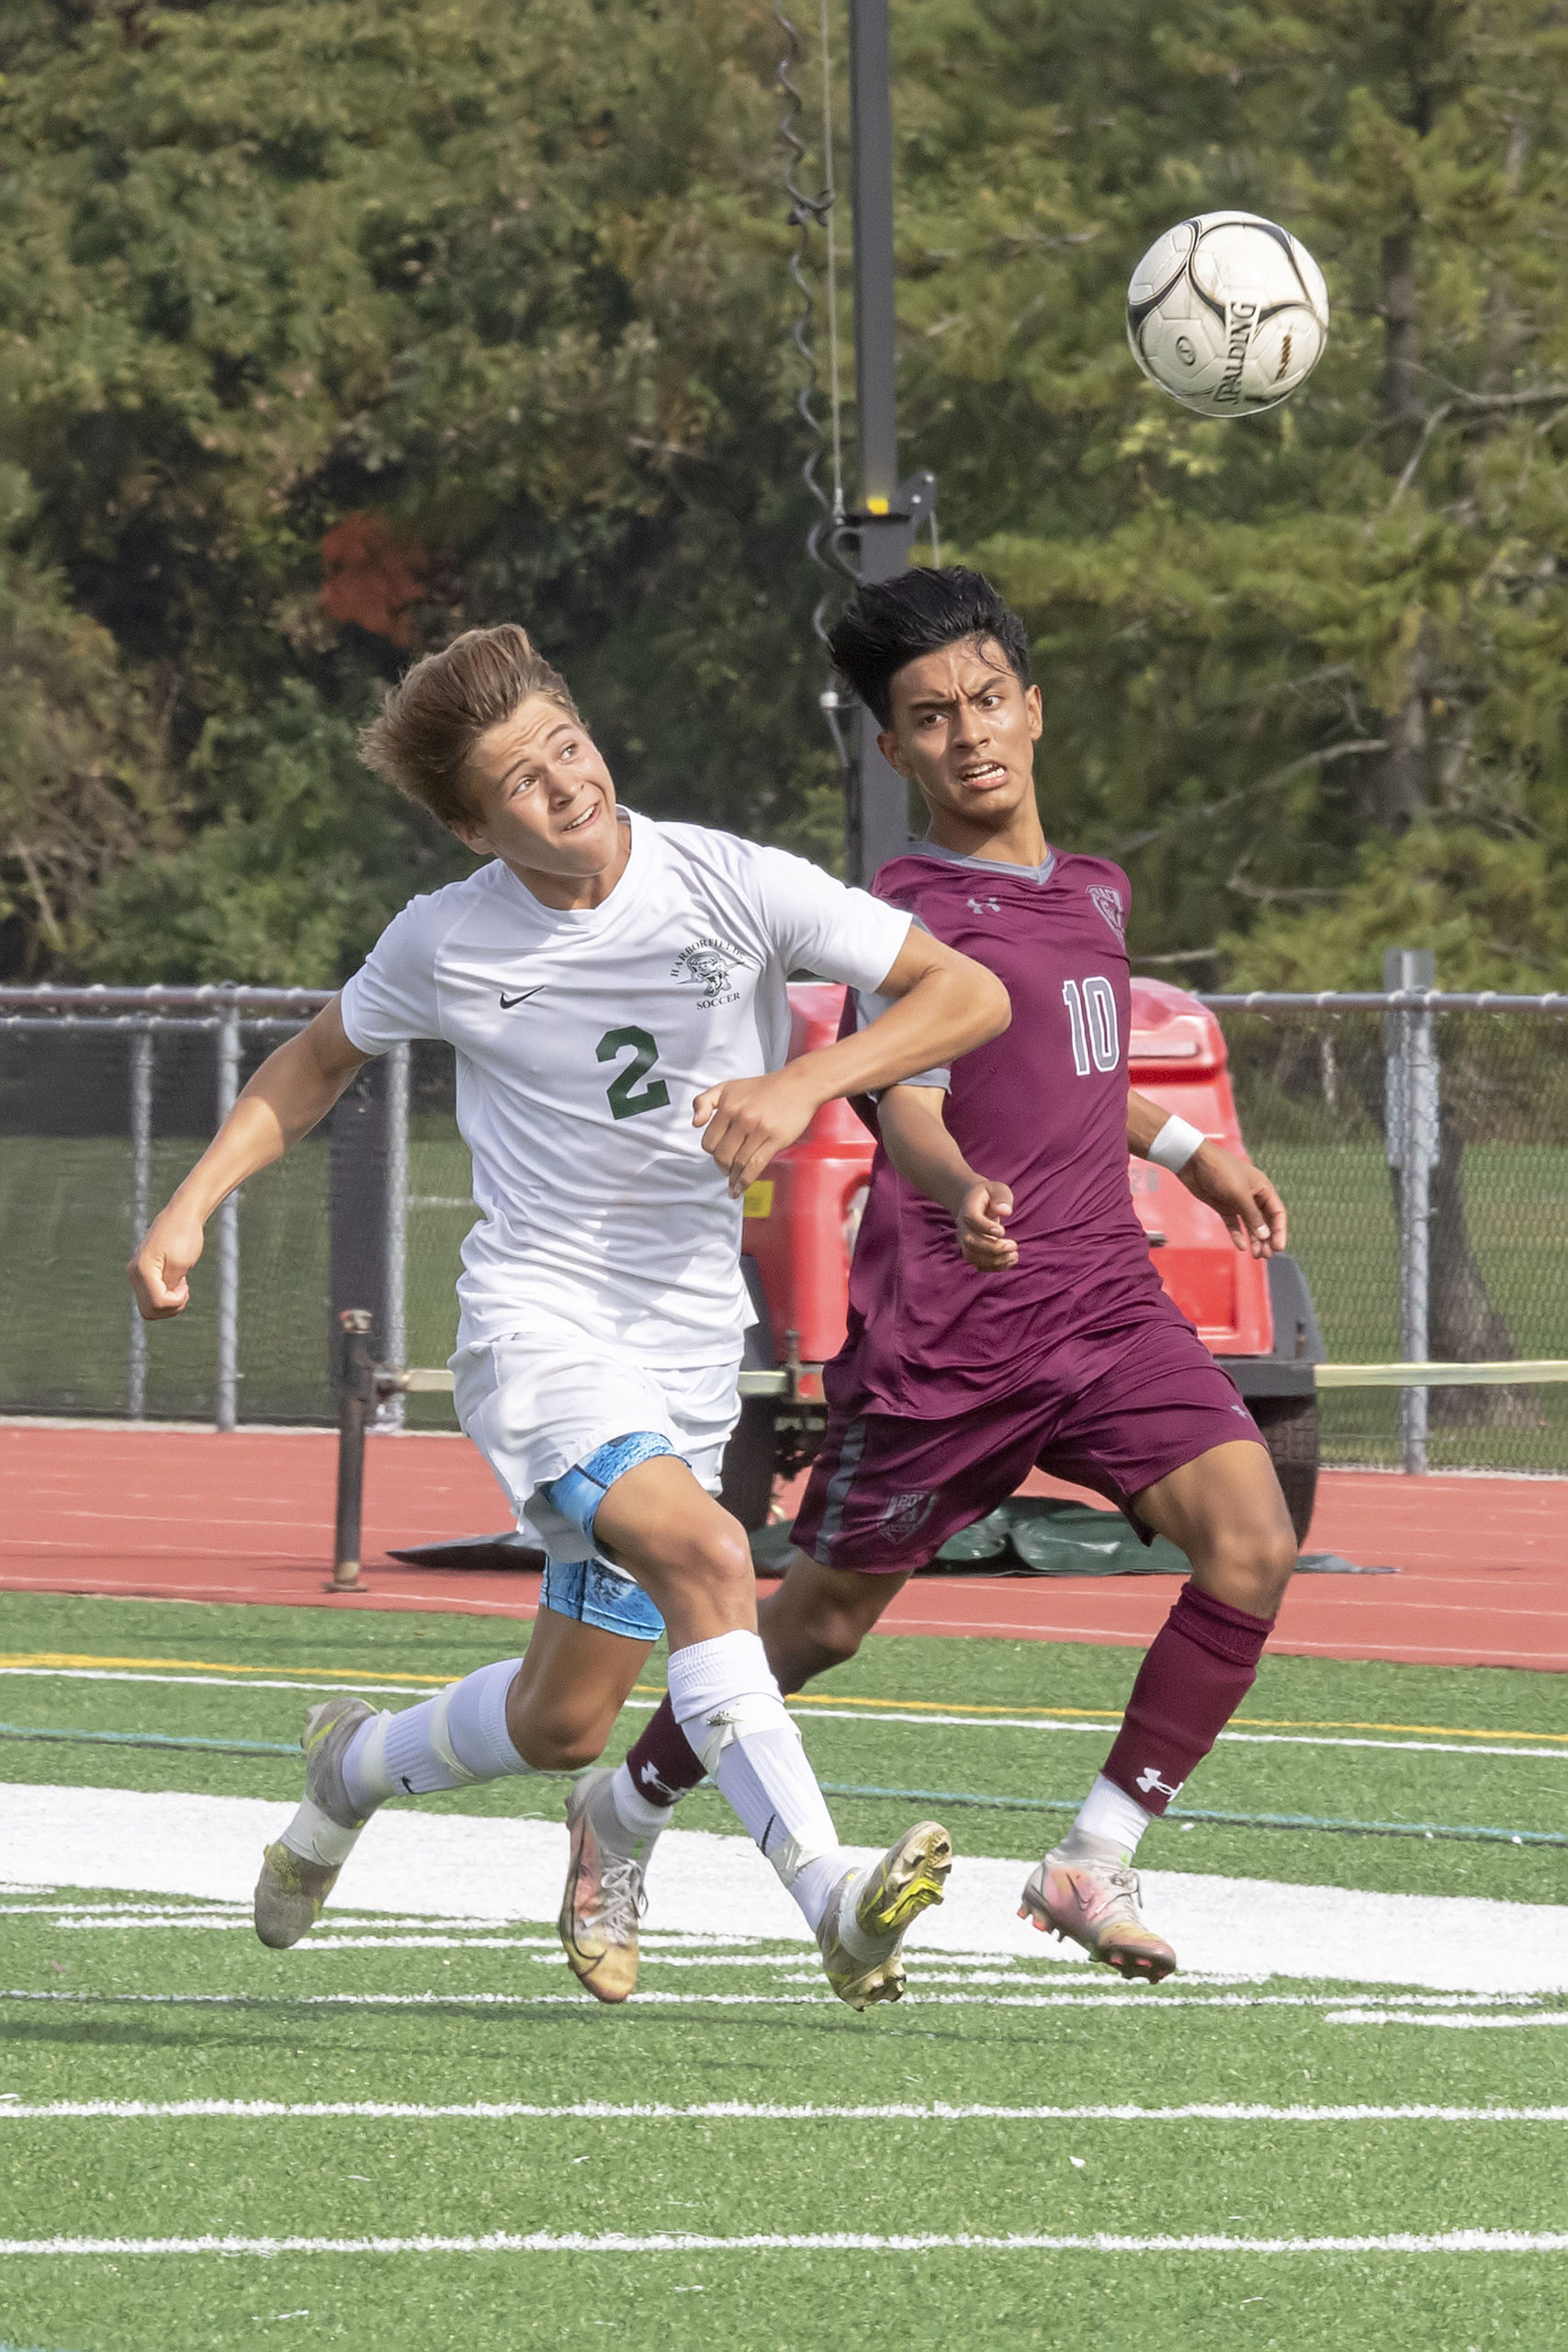 East Hampton's Eric Armijos goes to head the ball with a Harborfields player defending.